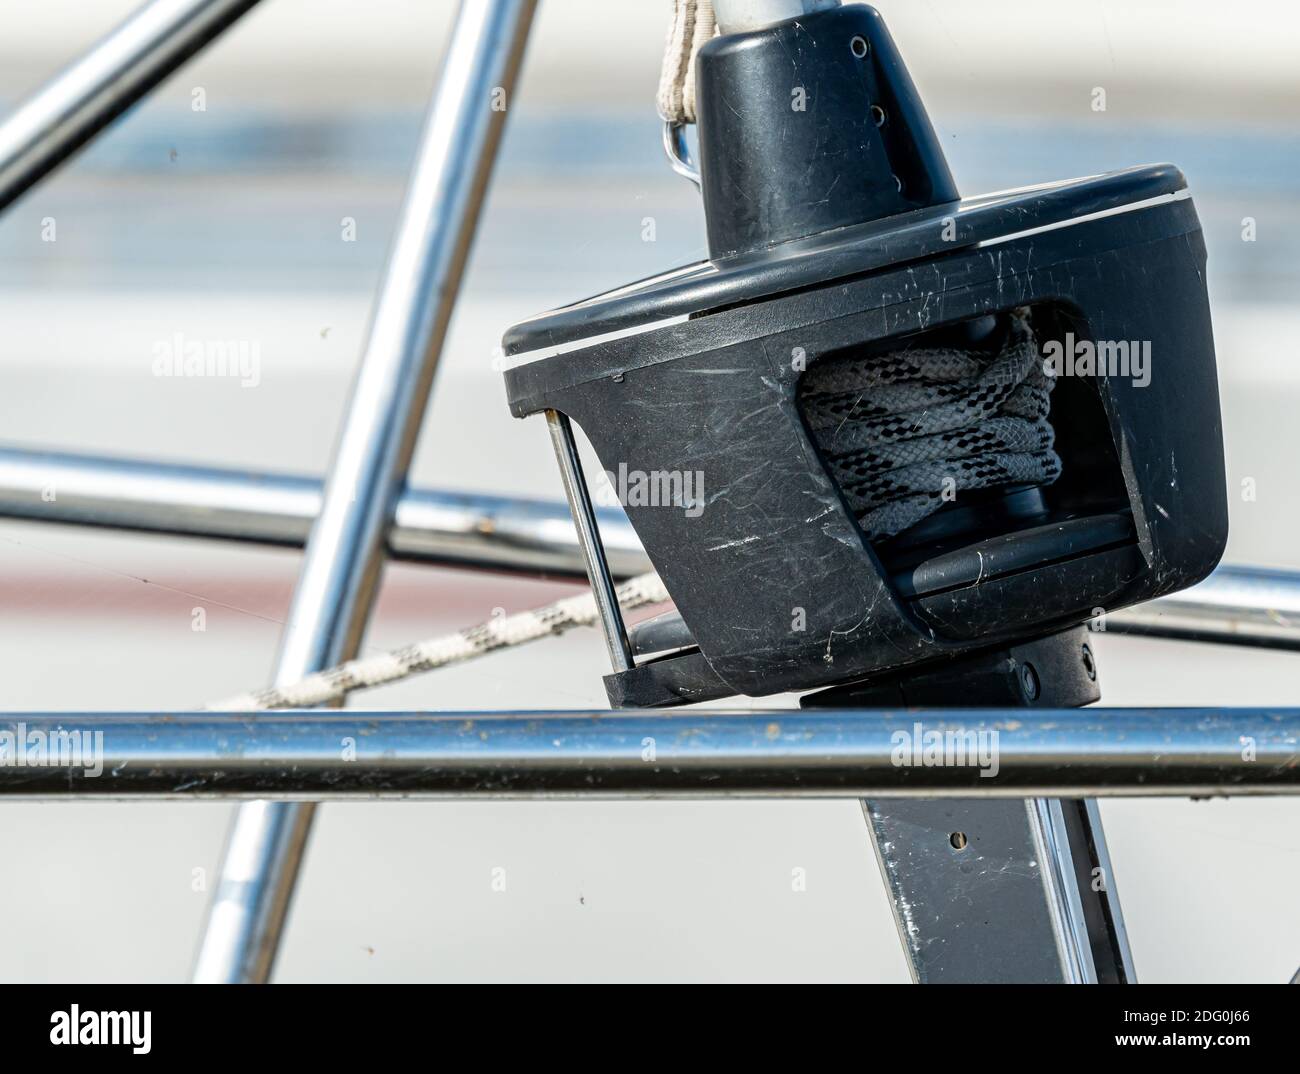 Roller furling on the bow of a sailboat to control the jib sail from the cockpit of the vessel. Close up.  Stock Photo